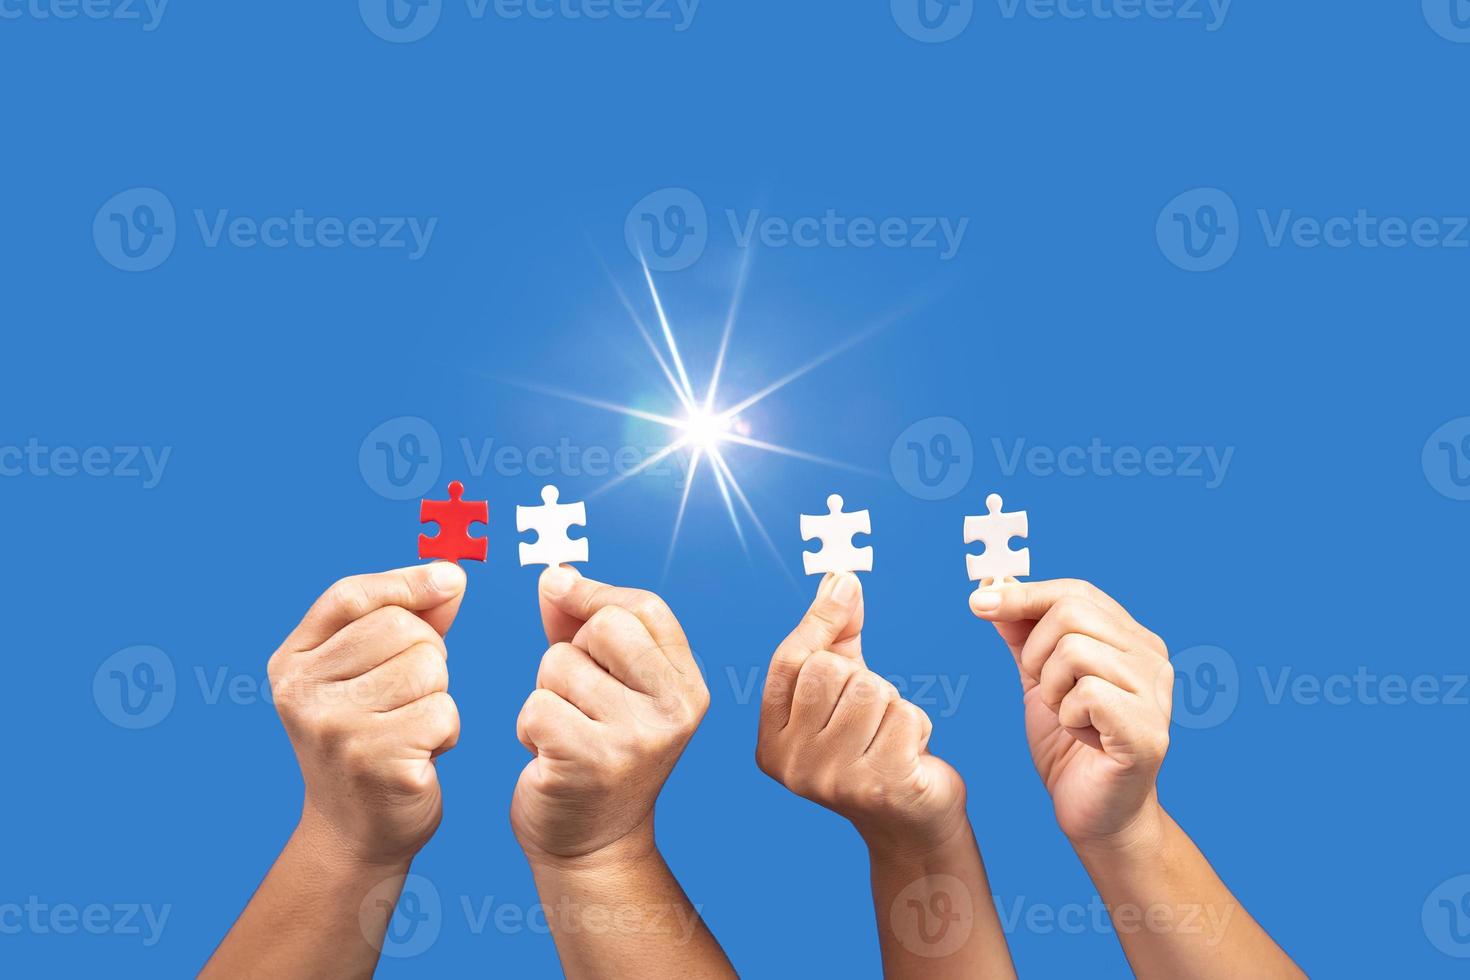 Hands holding jigsaw puzzles piece with clear blue background, success business, solution strategy, teamwork partnership concept photo